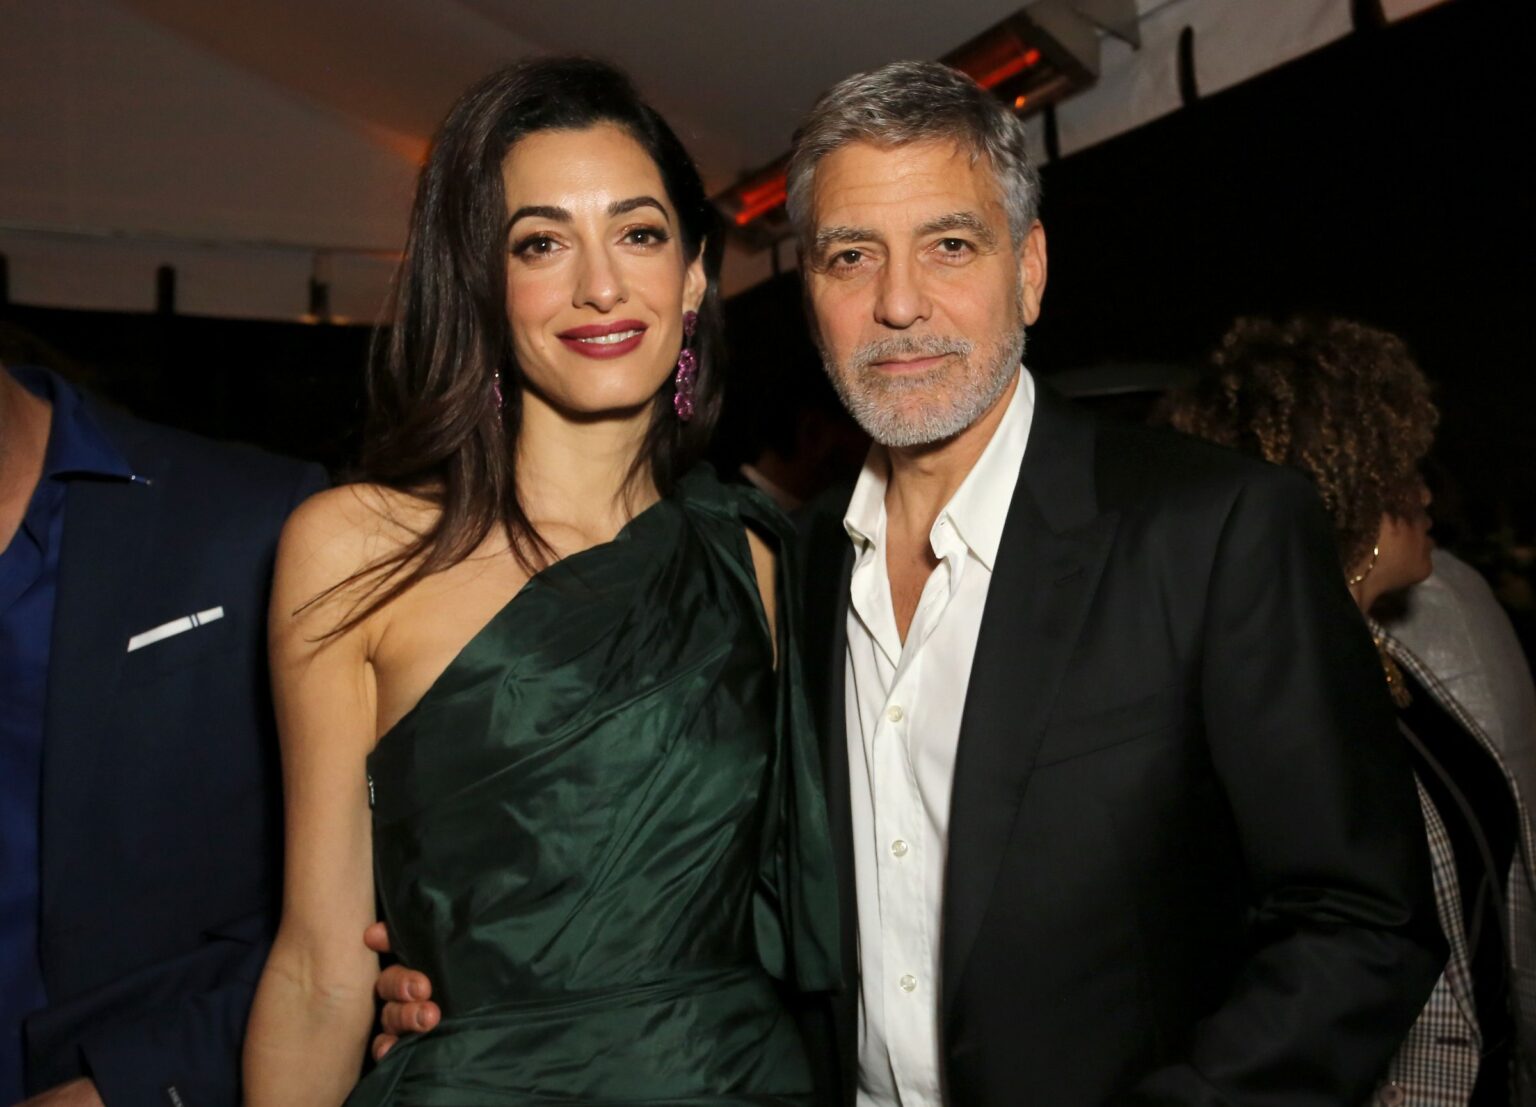 George Clooney’s impeccable looks may not be enough to keep his marriage with Amal Alamuddin afloat. Here are all the rumors about Clooney and his wife.